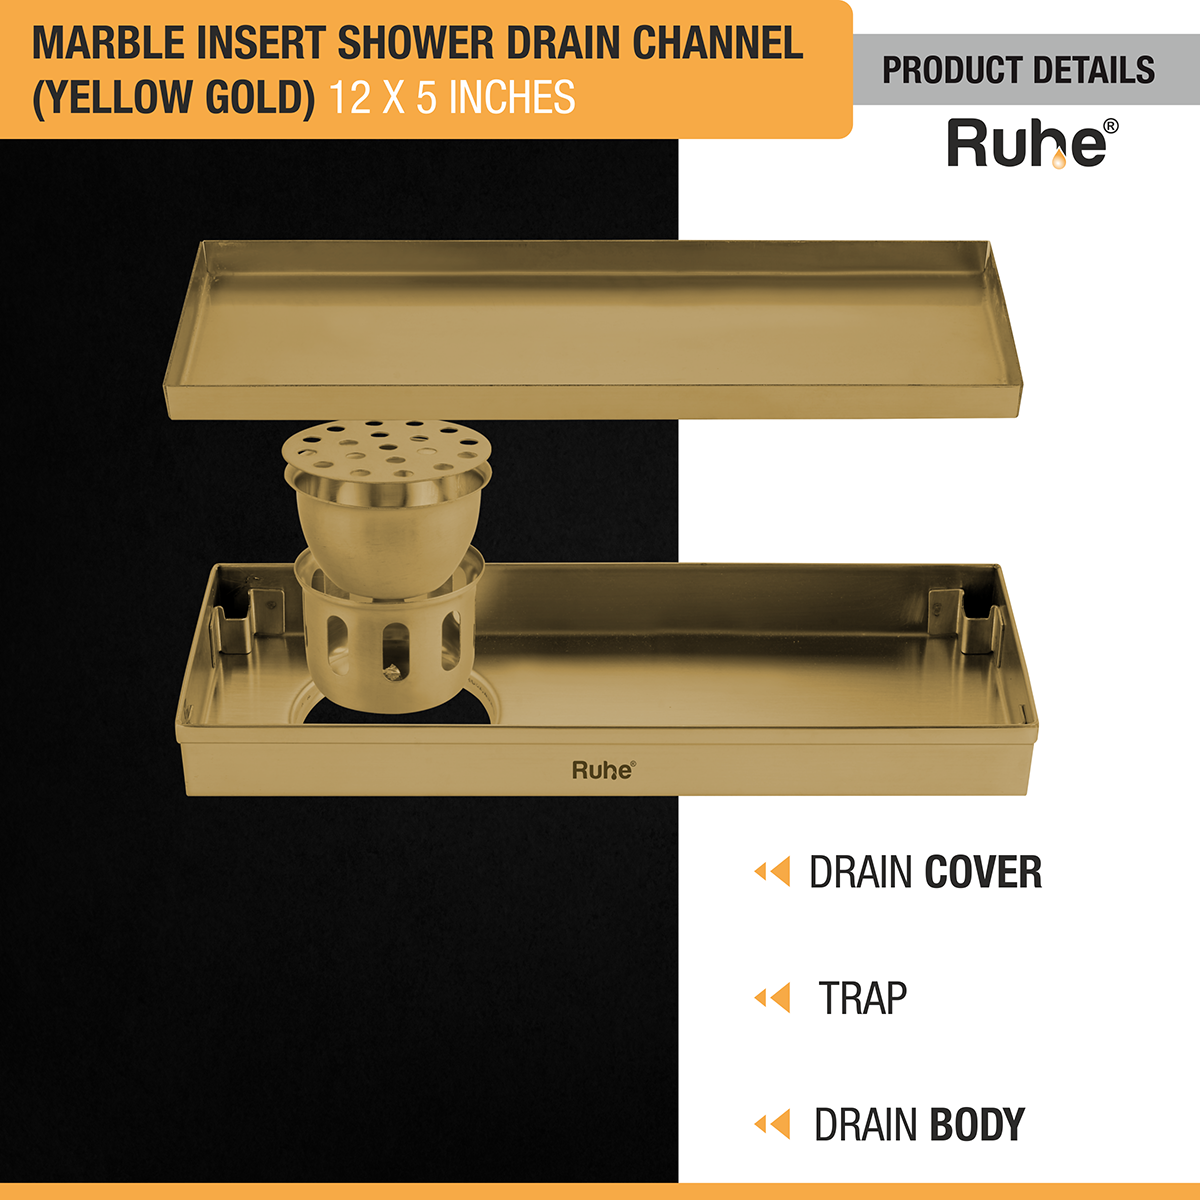 Marble Insert Shower Drain Channel (12 x 5 Inches) YELLOW GOLD PVD Coated with drain cover, trap, and drain body